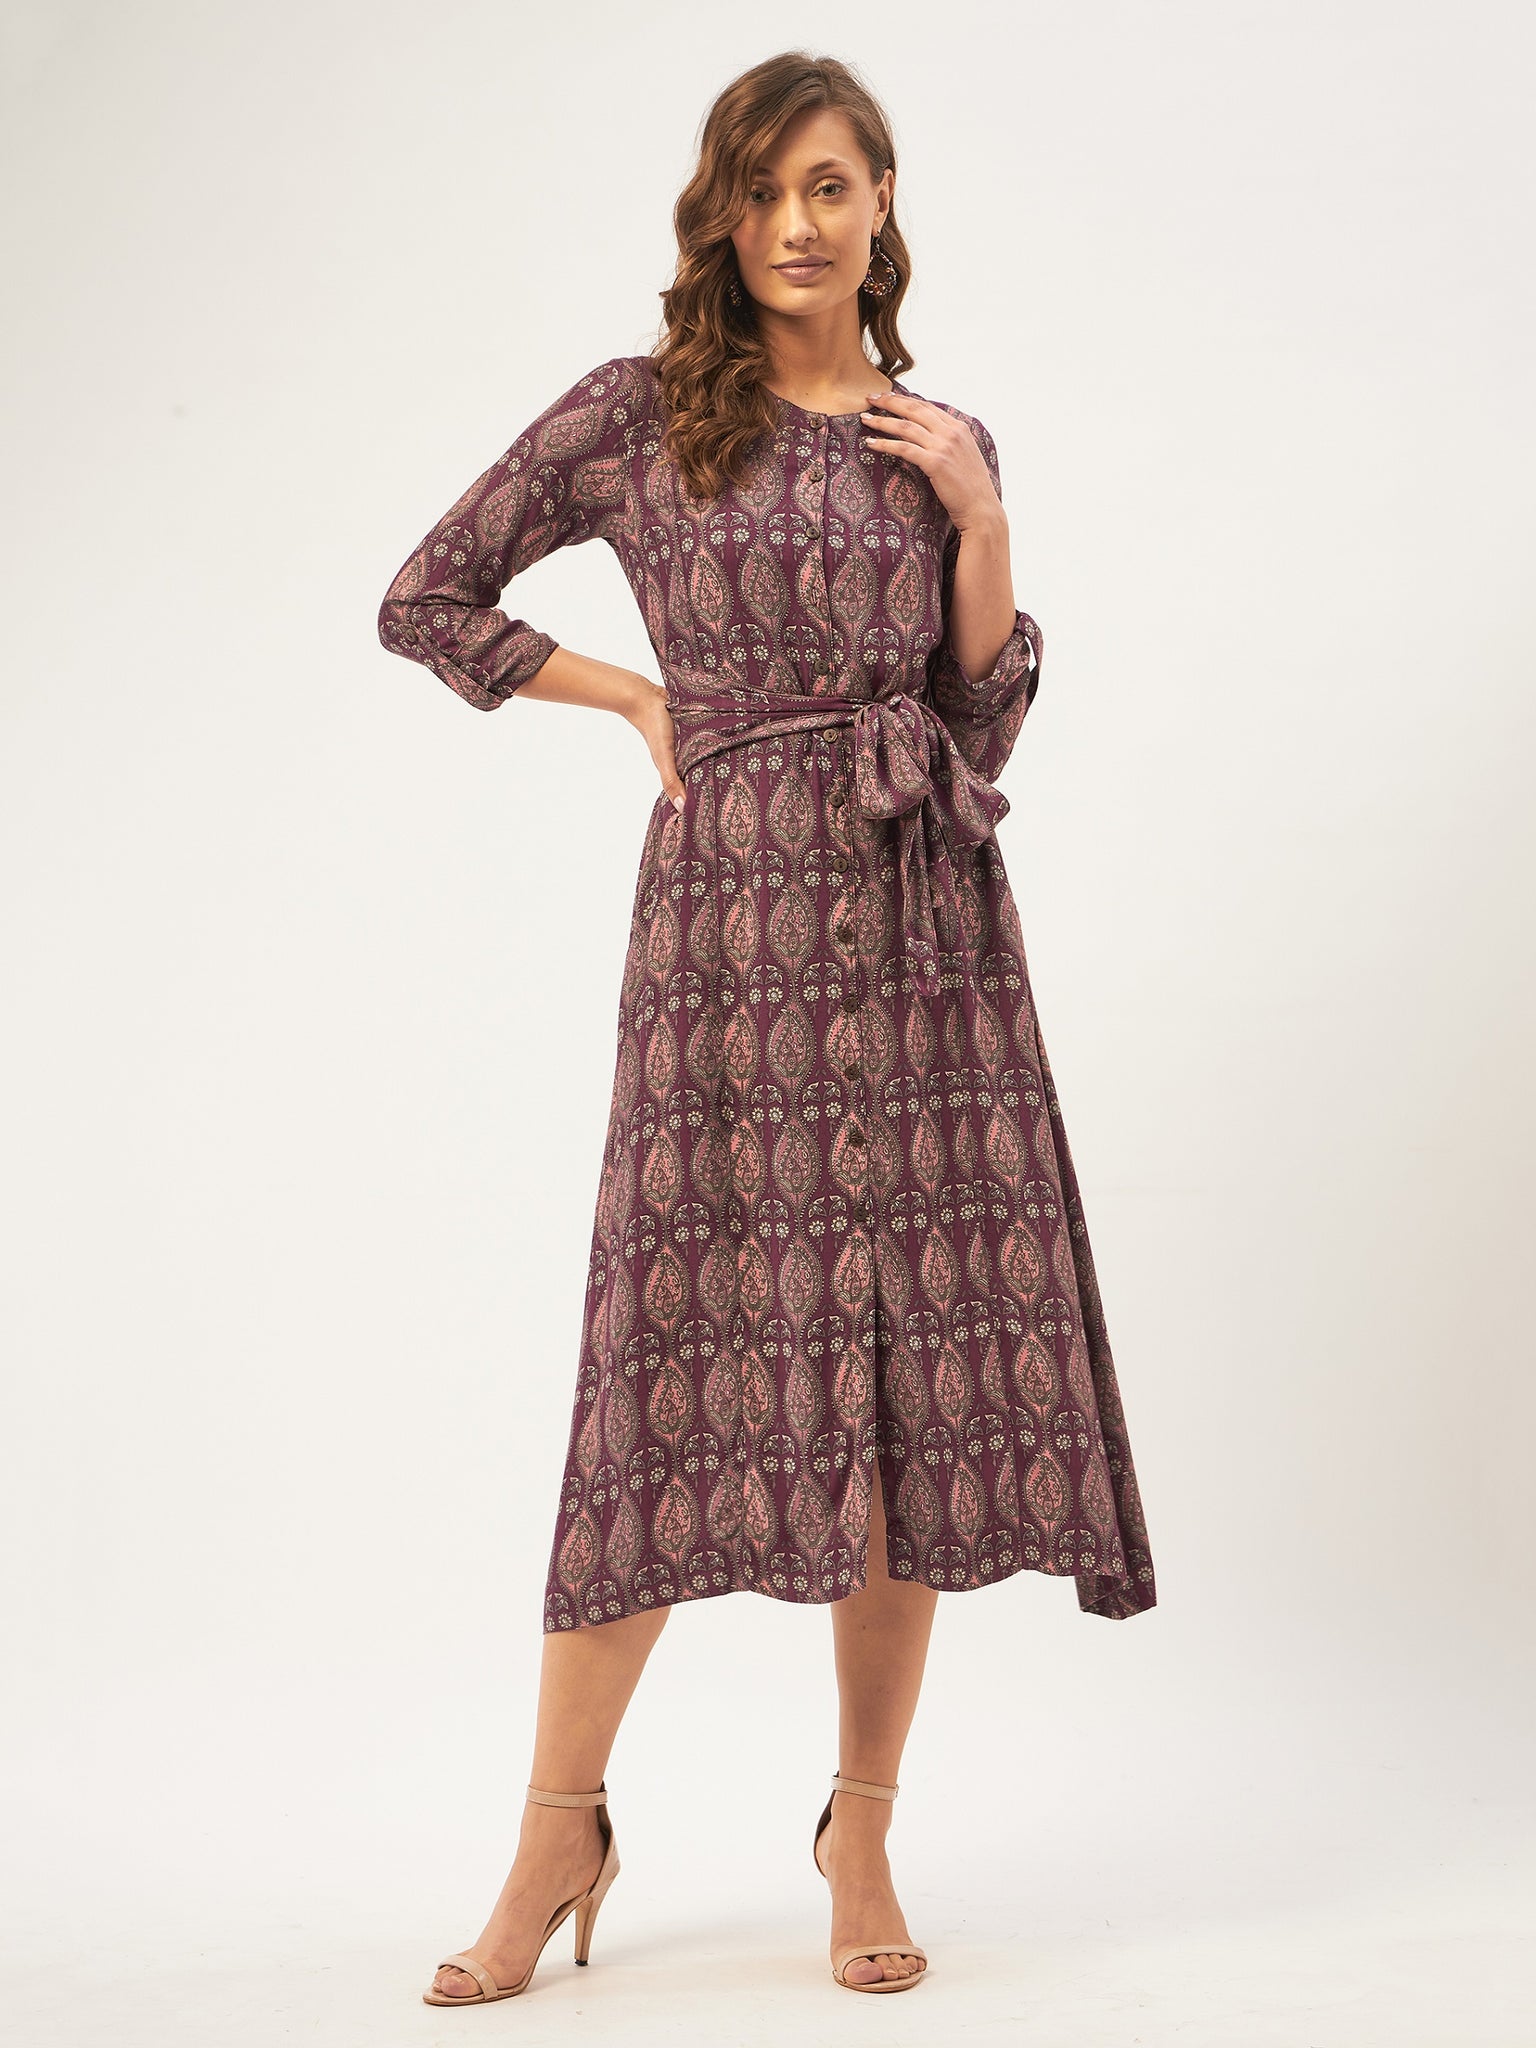 Rosewood Printed Middy Dress